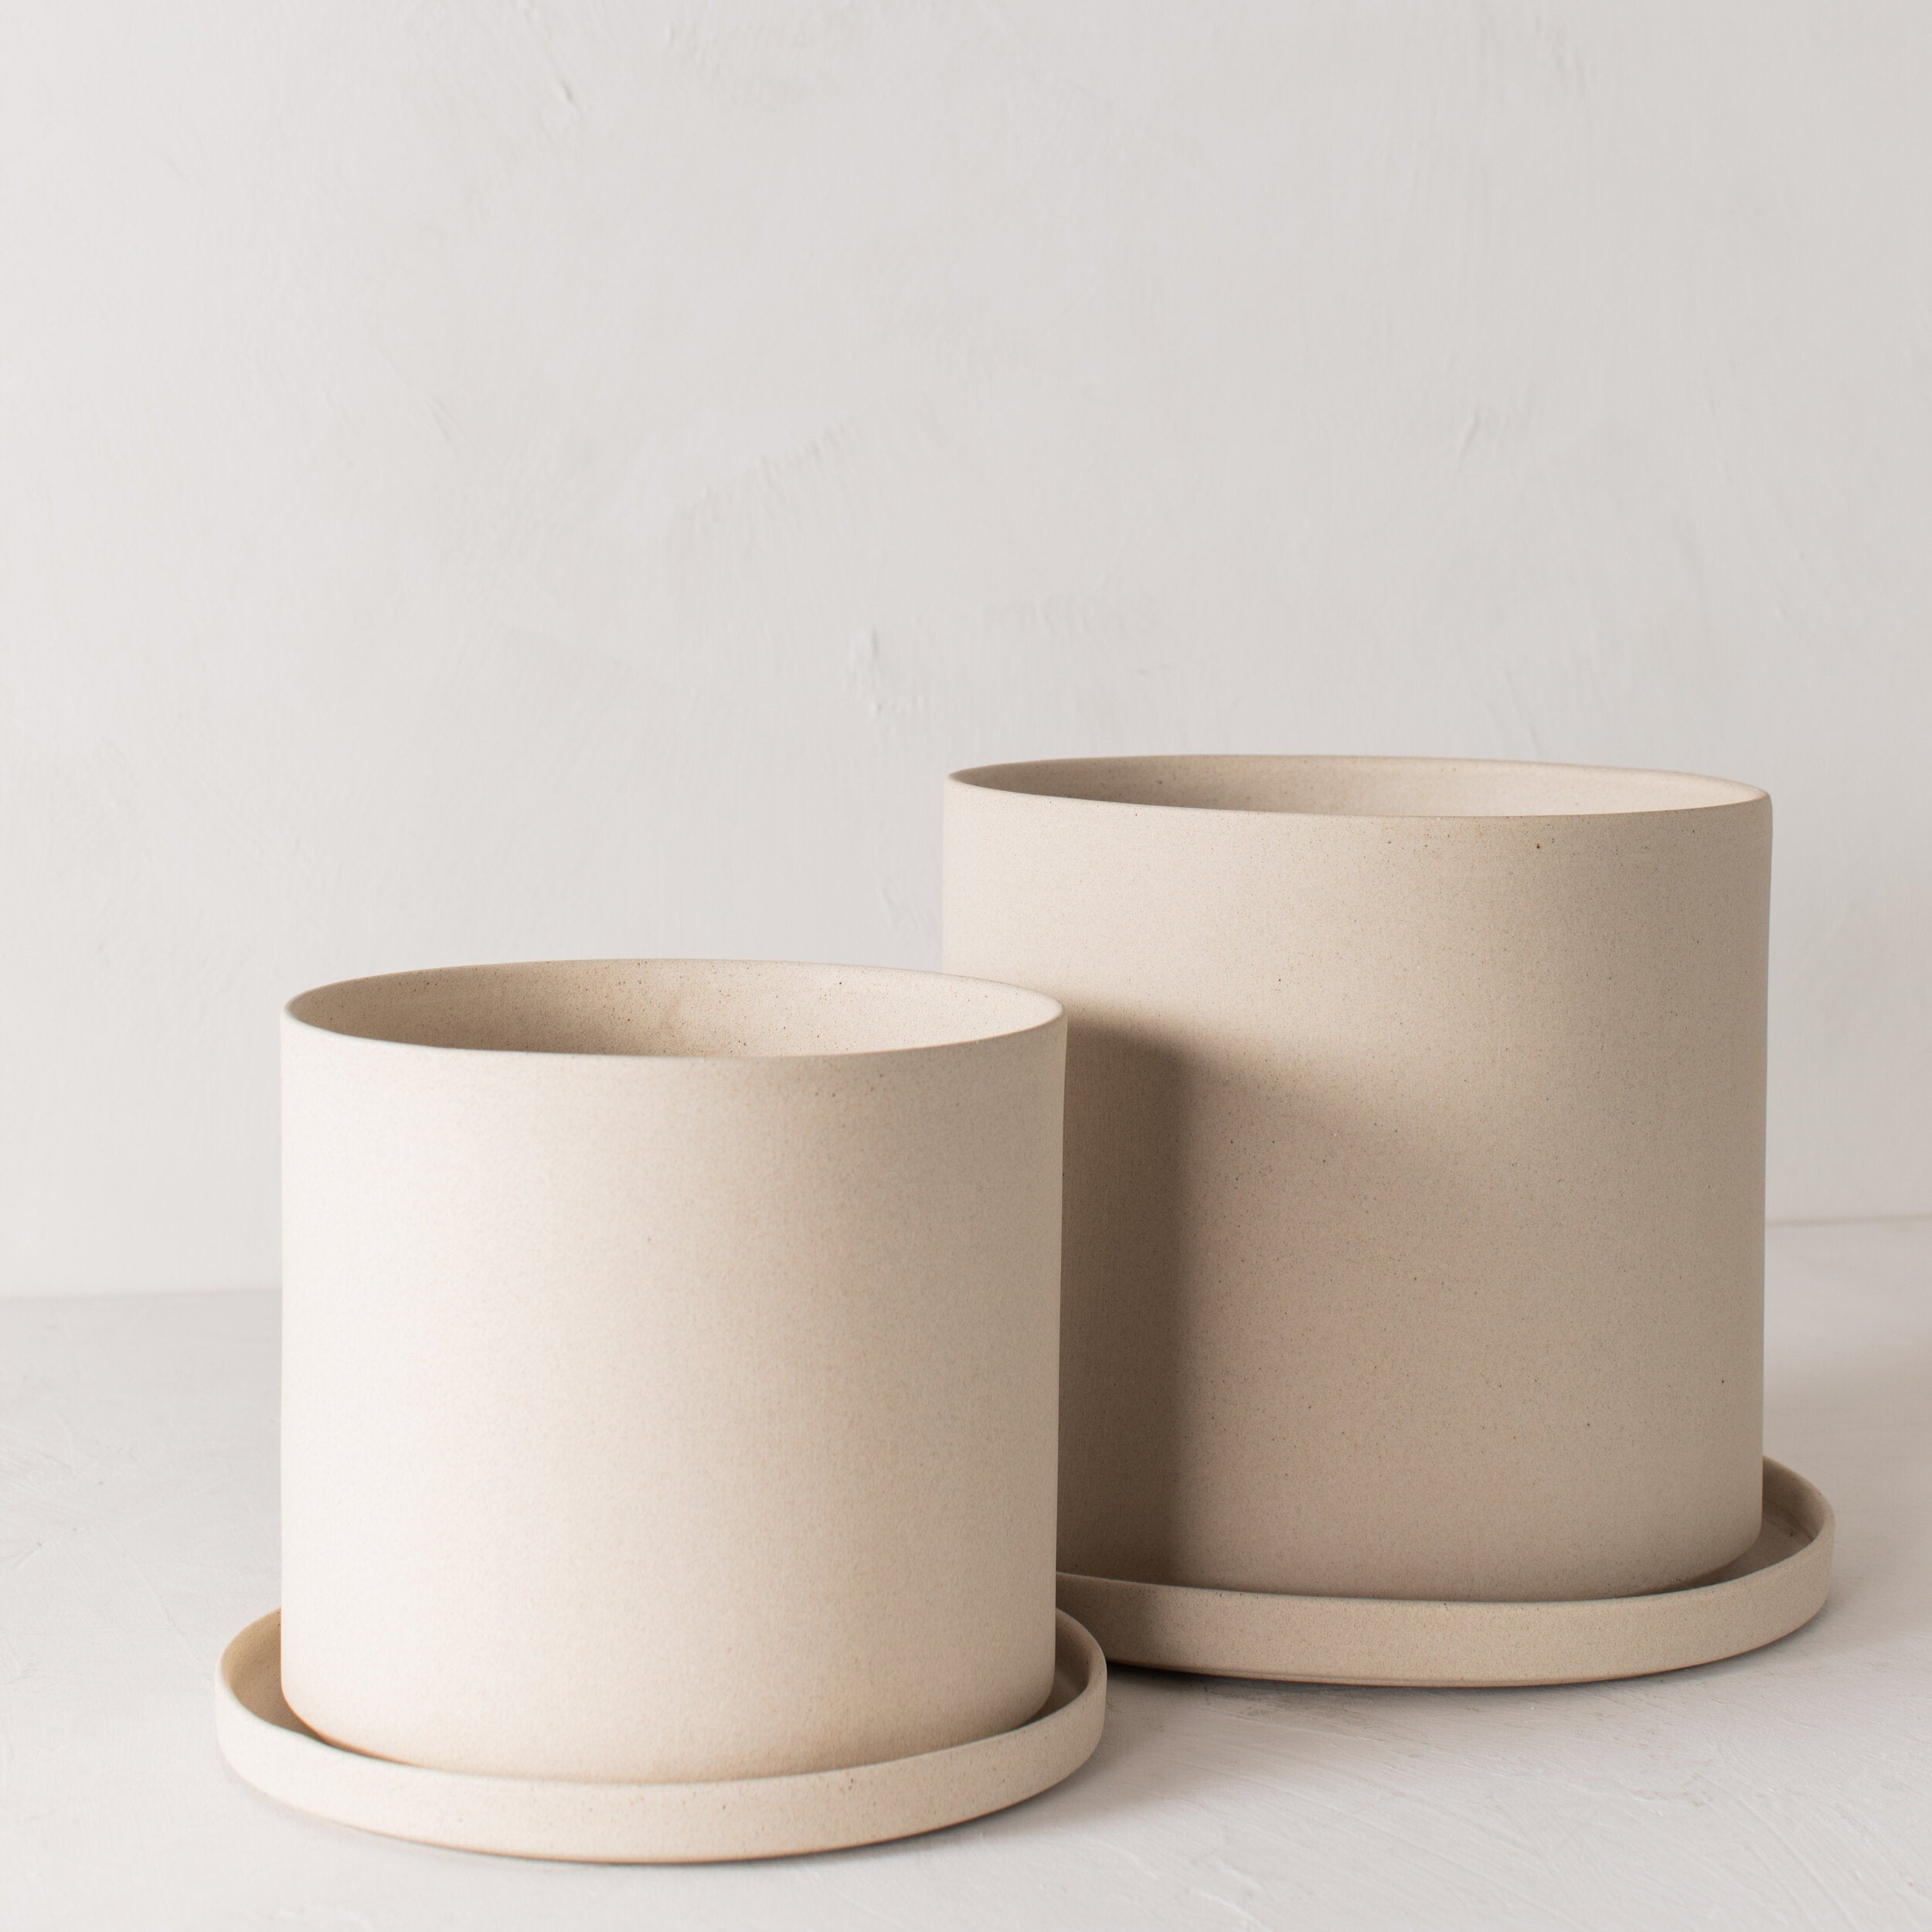 Two stoneware 8 inch and 10 inch ceramic planter with bottom drainage dish. Staged on a white plaster textured tabletop against a plaster textured white wall. Designed by Convivial Production, sold by Shop Verdant Kansas City plant store.